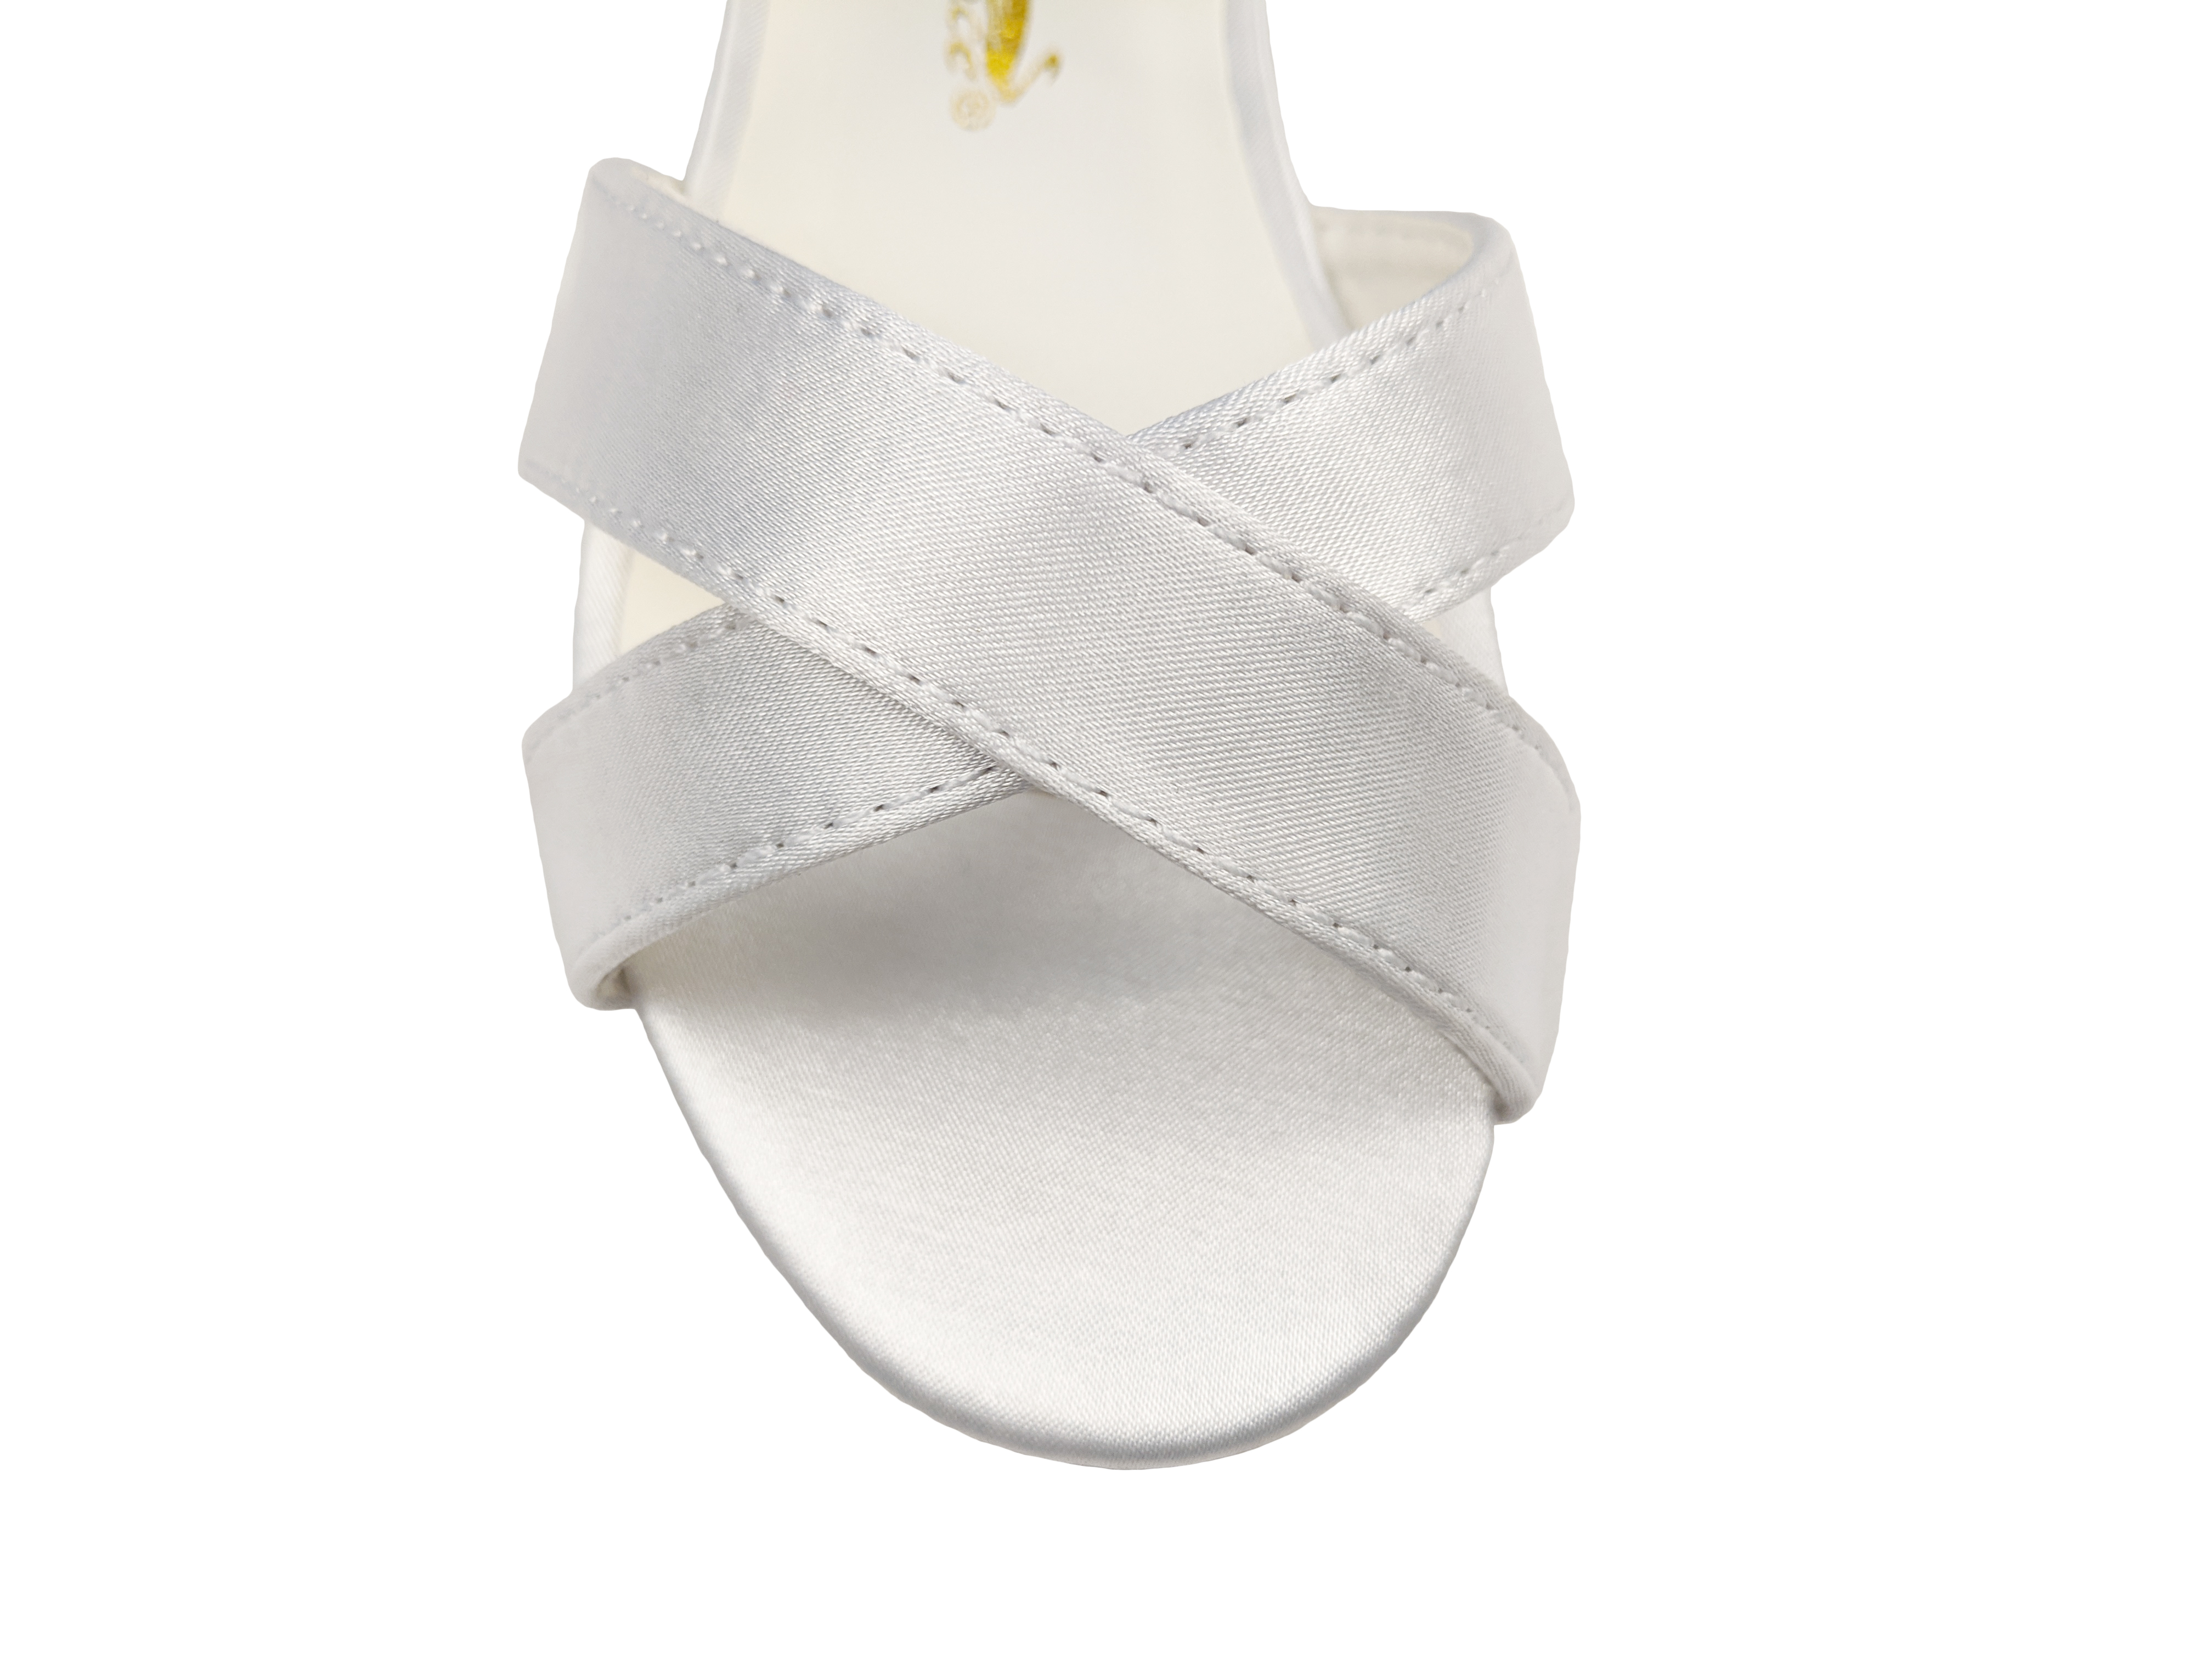 Little Things Mean A Lot Girls White Satin Dress Sandals with Heel (Little Girl, Big Girl) - image 5 of 6